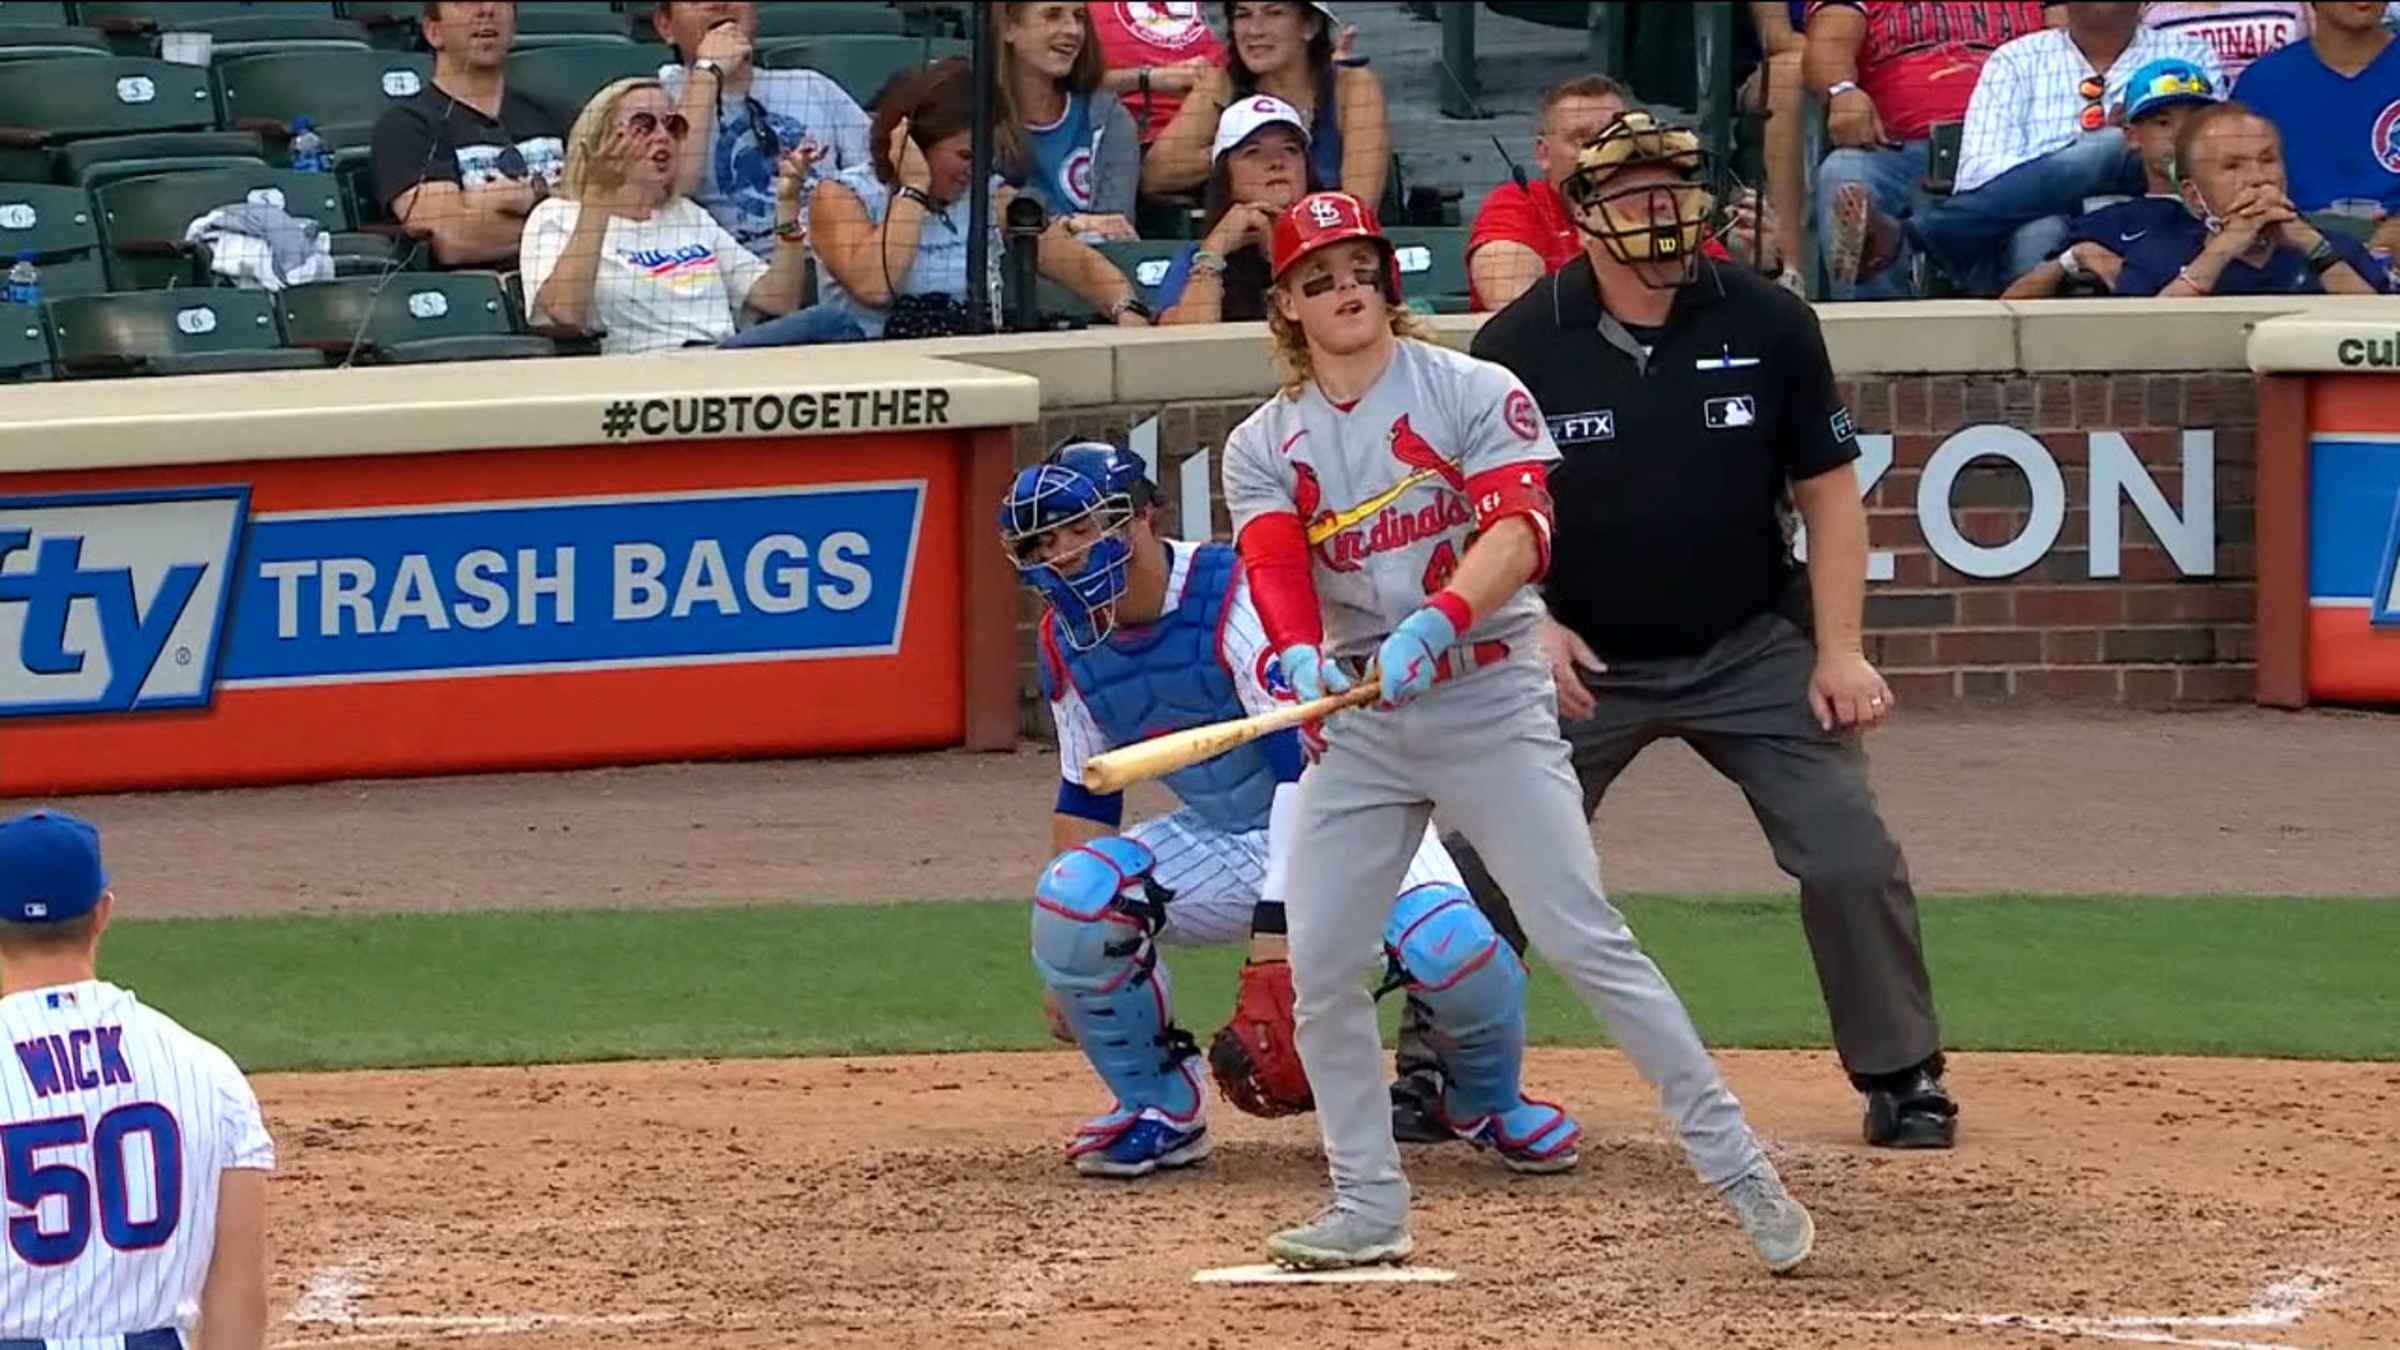 Yankees' Harrison Bader ties game with homer, saves it with glove